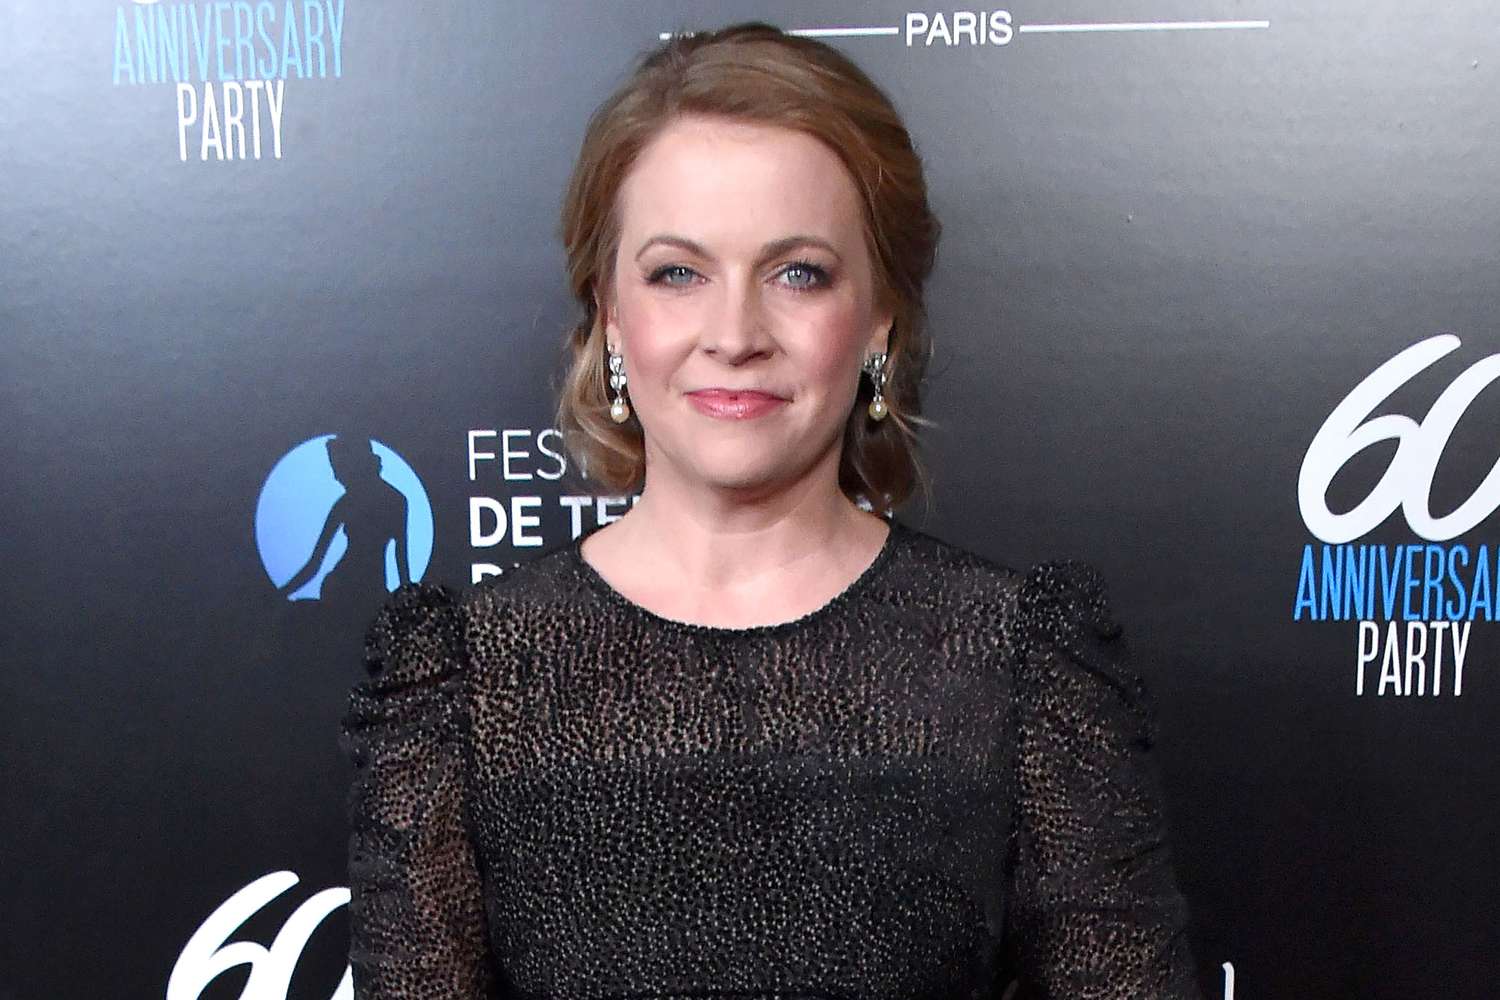 Melissa Joan Hart attends the Monte-Carlo Television Festival 60th Anniversary Reception at Sunset Tower Hotel in Los Angeles, California, on January 5, 2020.